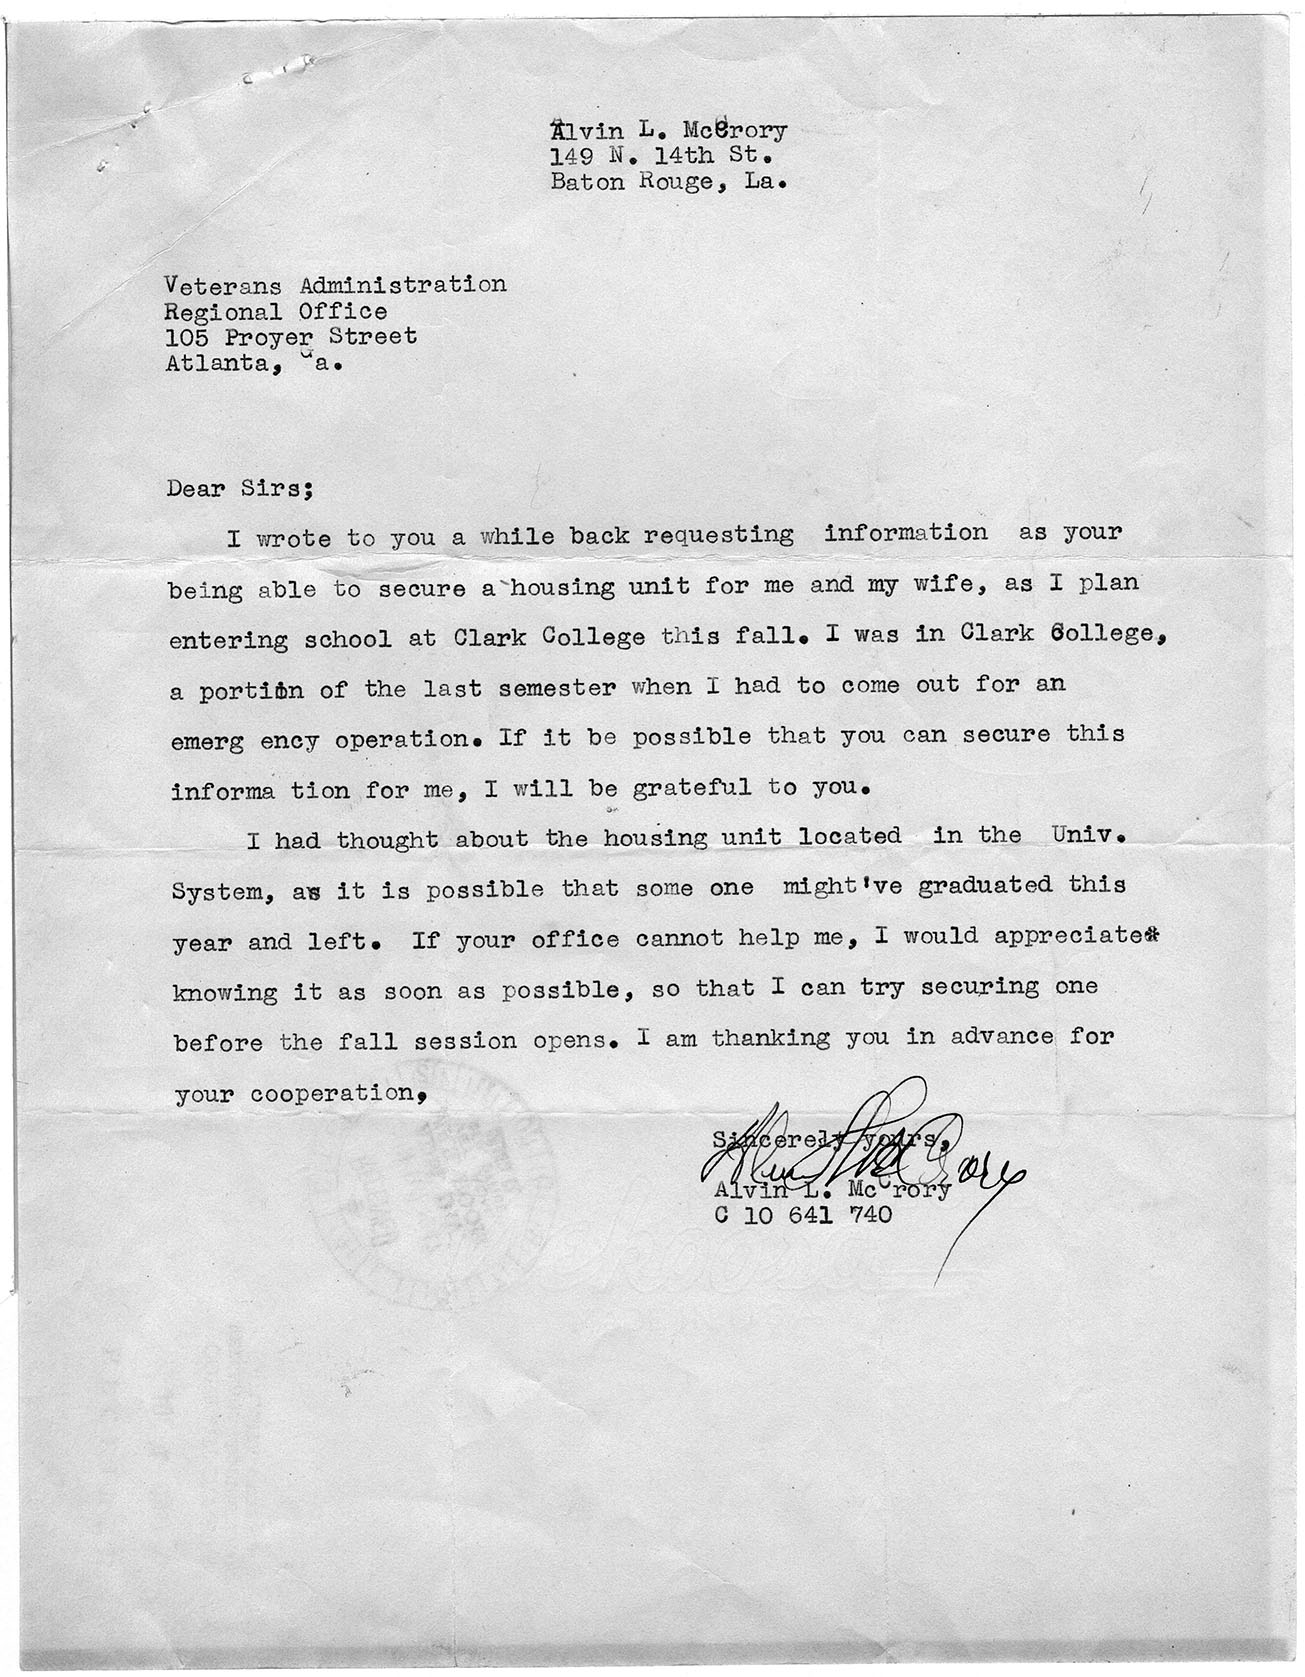 Letter to Veterans Administration from Alvin L. McCrory, Alvin L. McCrory, Atlanta University, 1947 July 1, Rufus E. Clement Records, 1933-1969 - AU Presidential Records